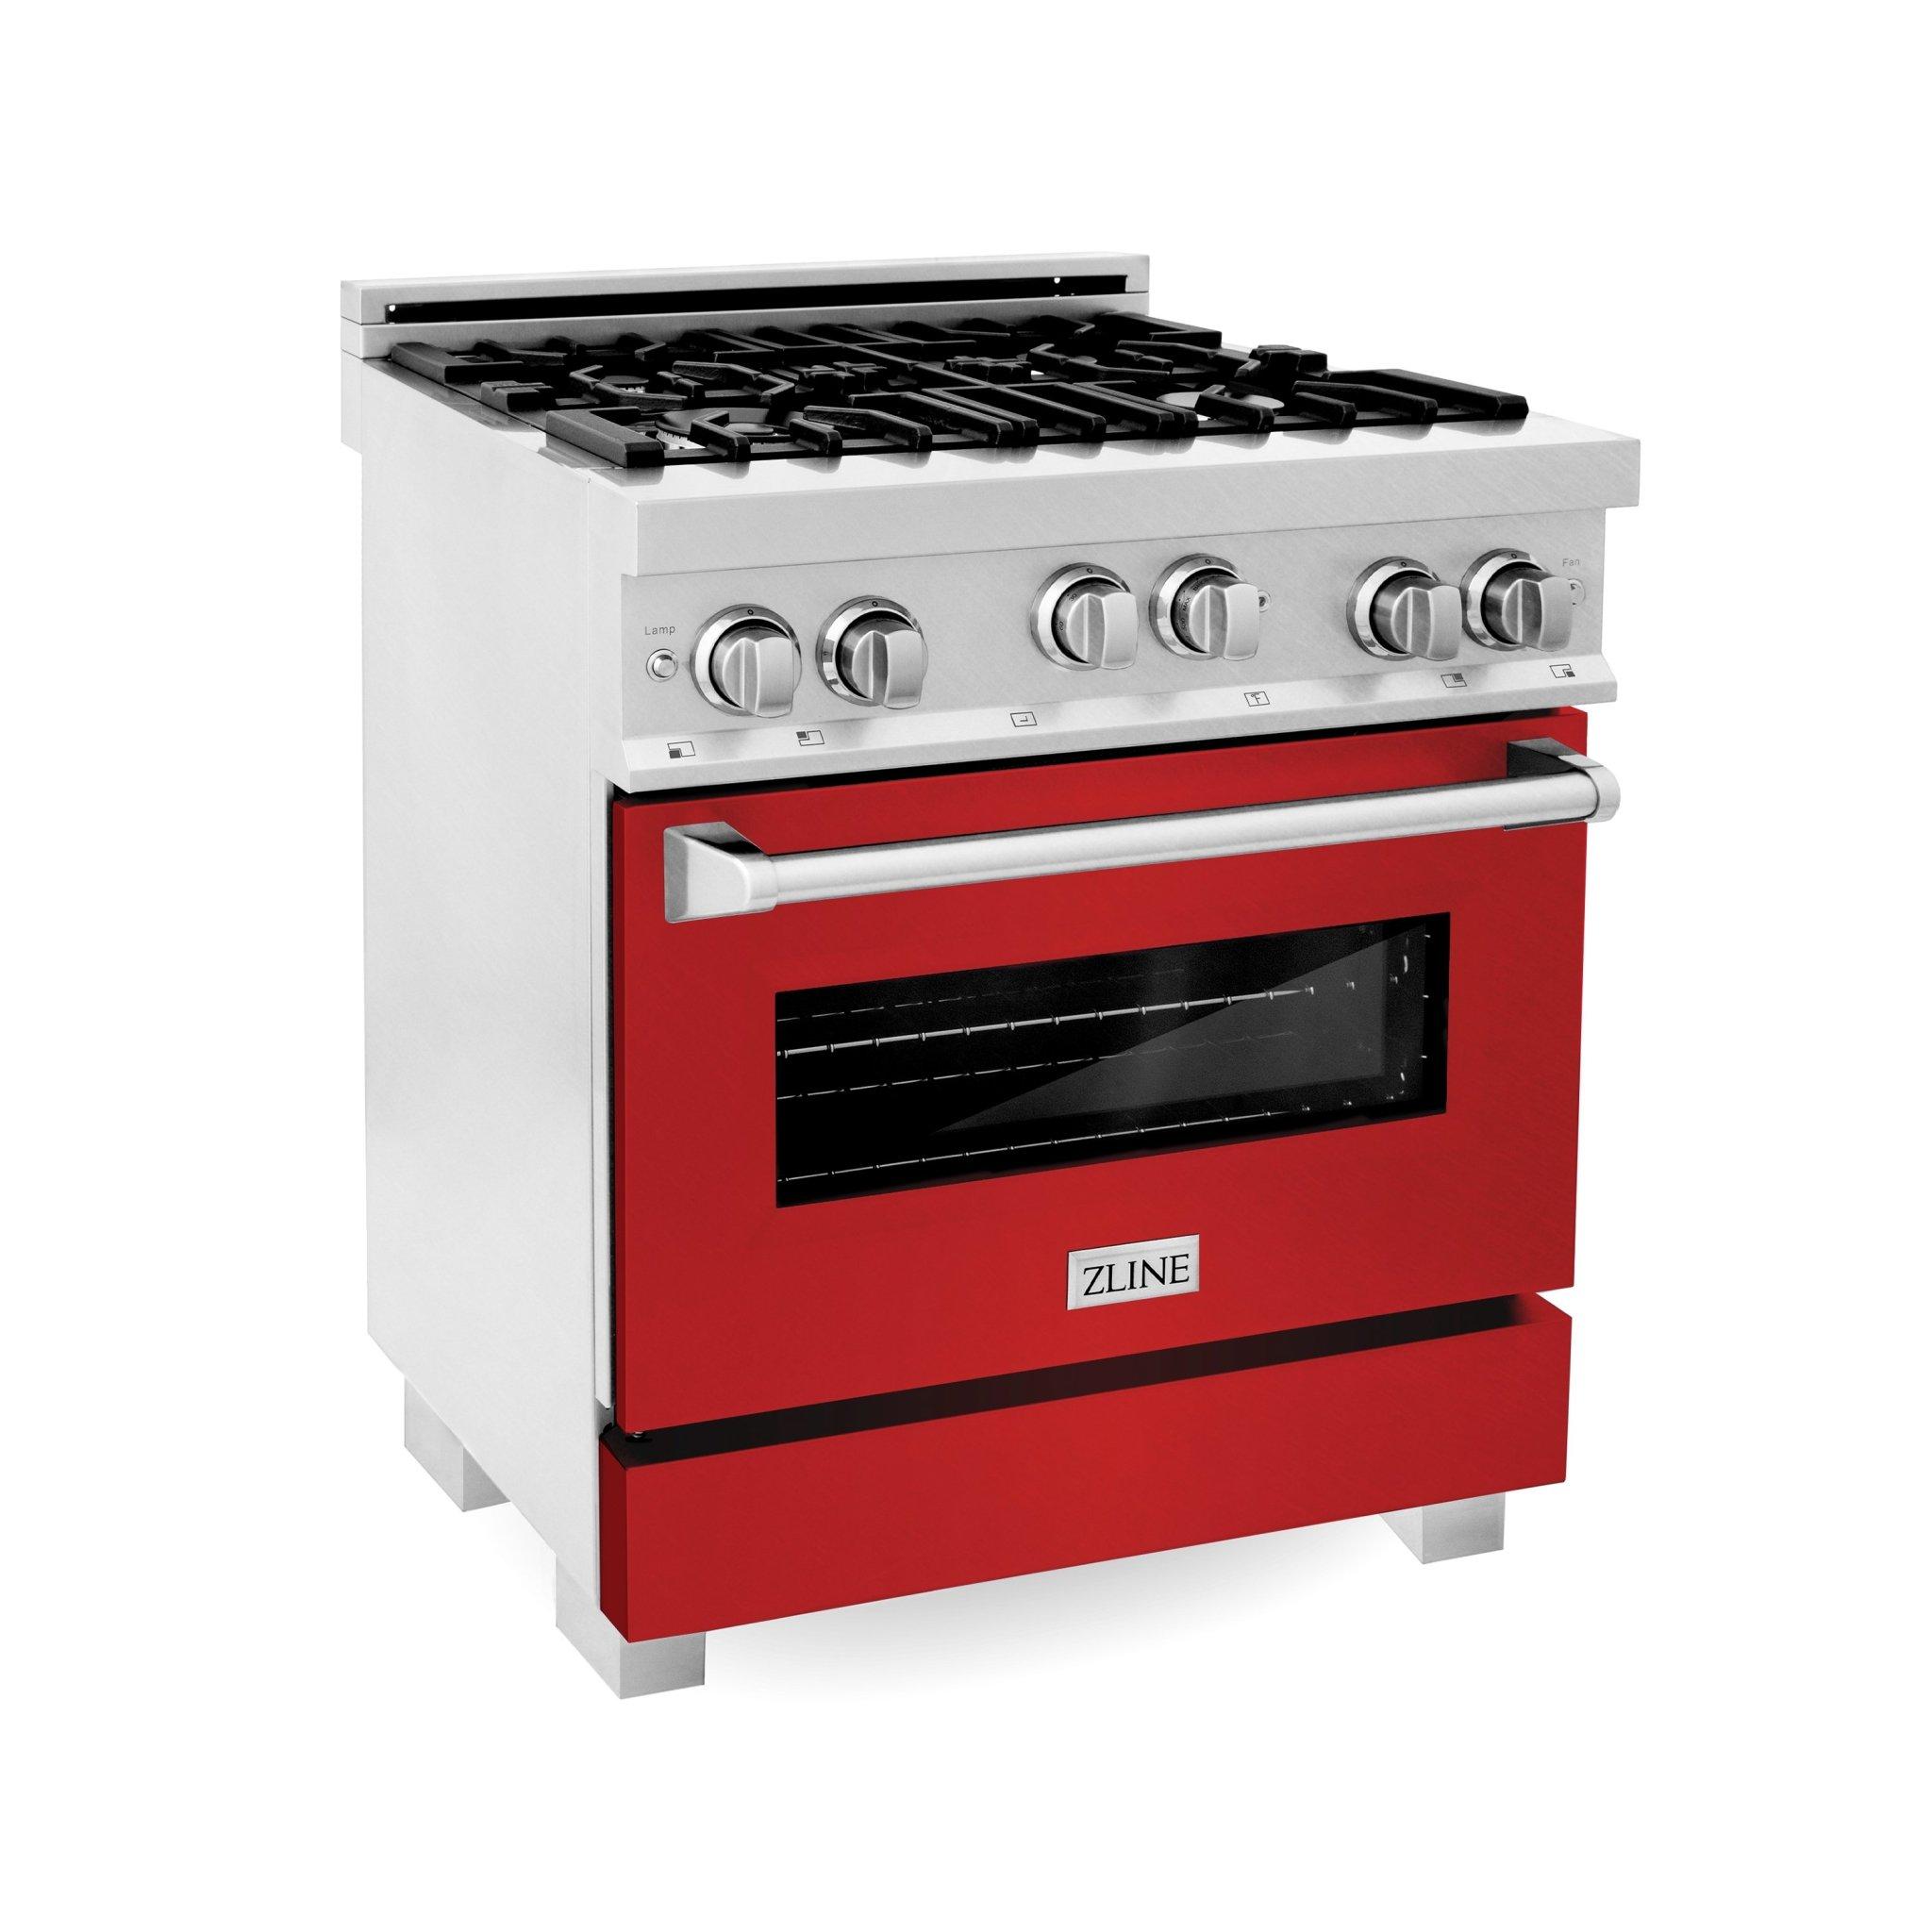 ZLINE KITCHEN AND BATH RGSSN30 ZLINE 30" 4.0 cu. ft. Range with Gas Stove and Gas Oven in DuraSnow R Stainless Steel with Color Door Options Color: DuraSnow R Stainless Steel